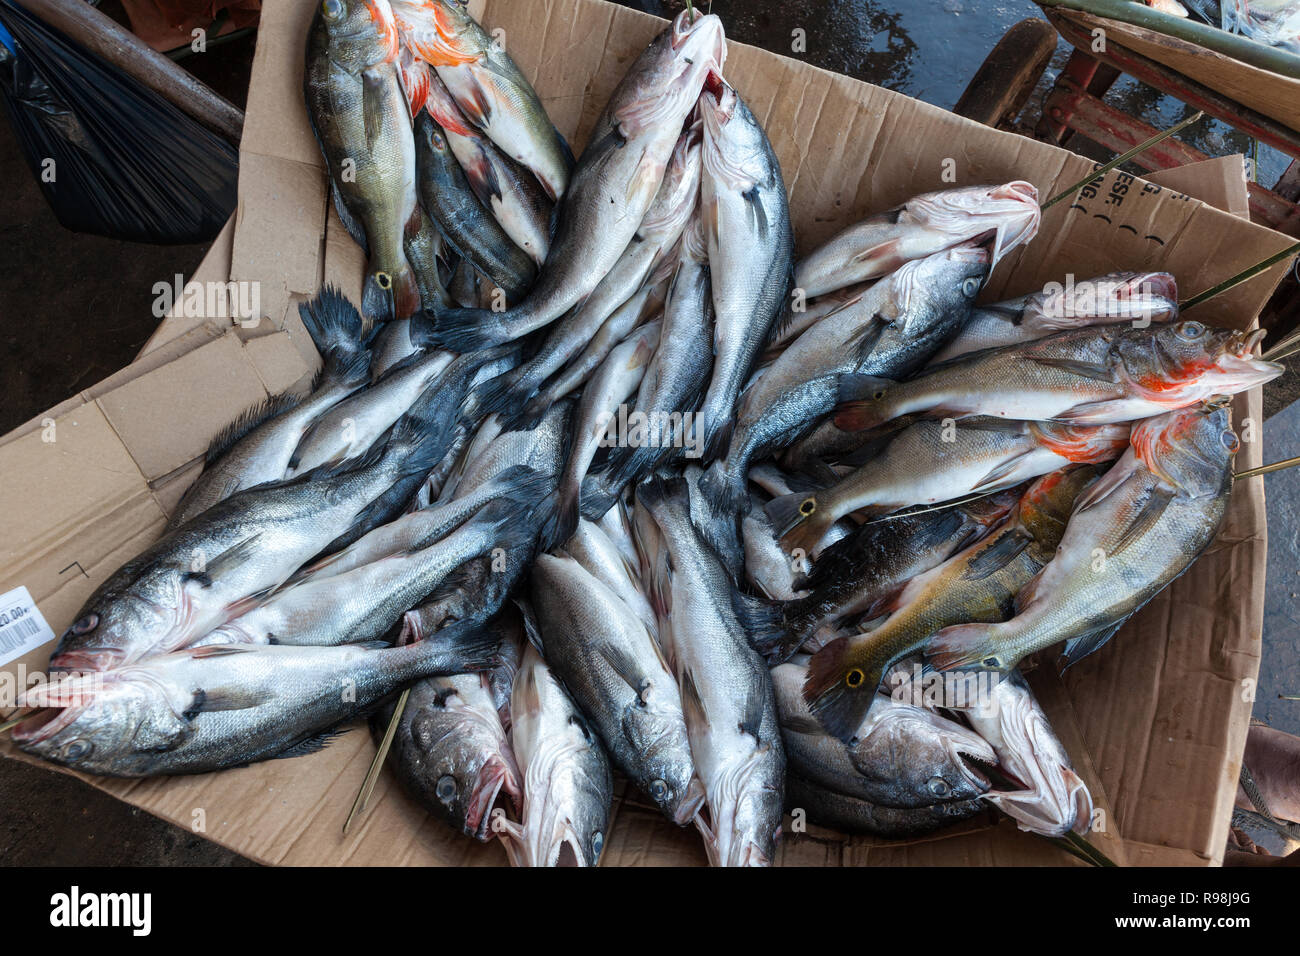 Close up of Brazilian 'Tucunare' fish (Cichla ocellaris) and others for sale at street market in Manaus, Amazonas, Brazil. Stock Photo